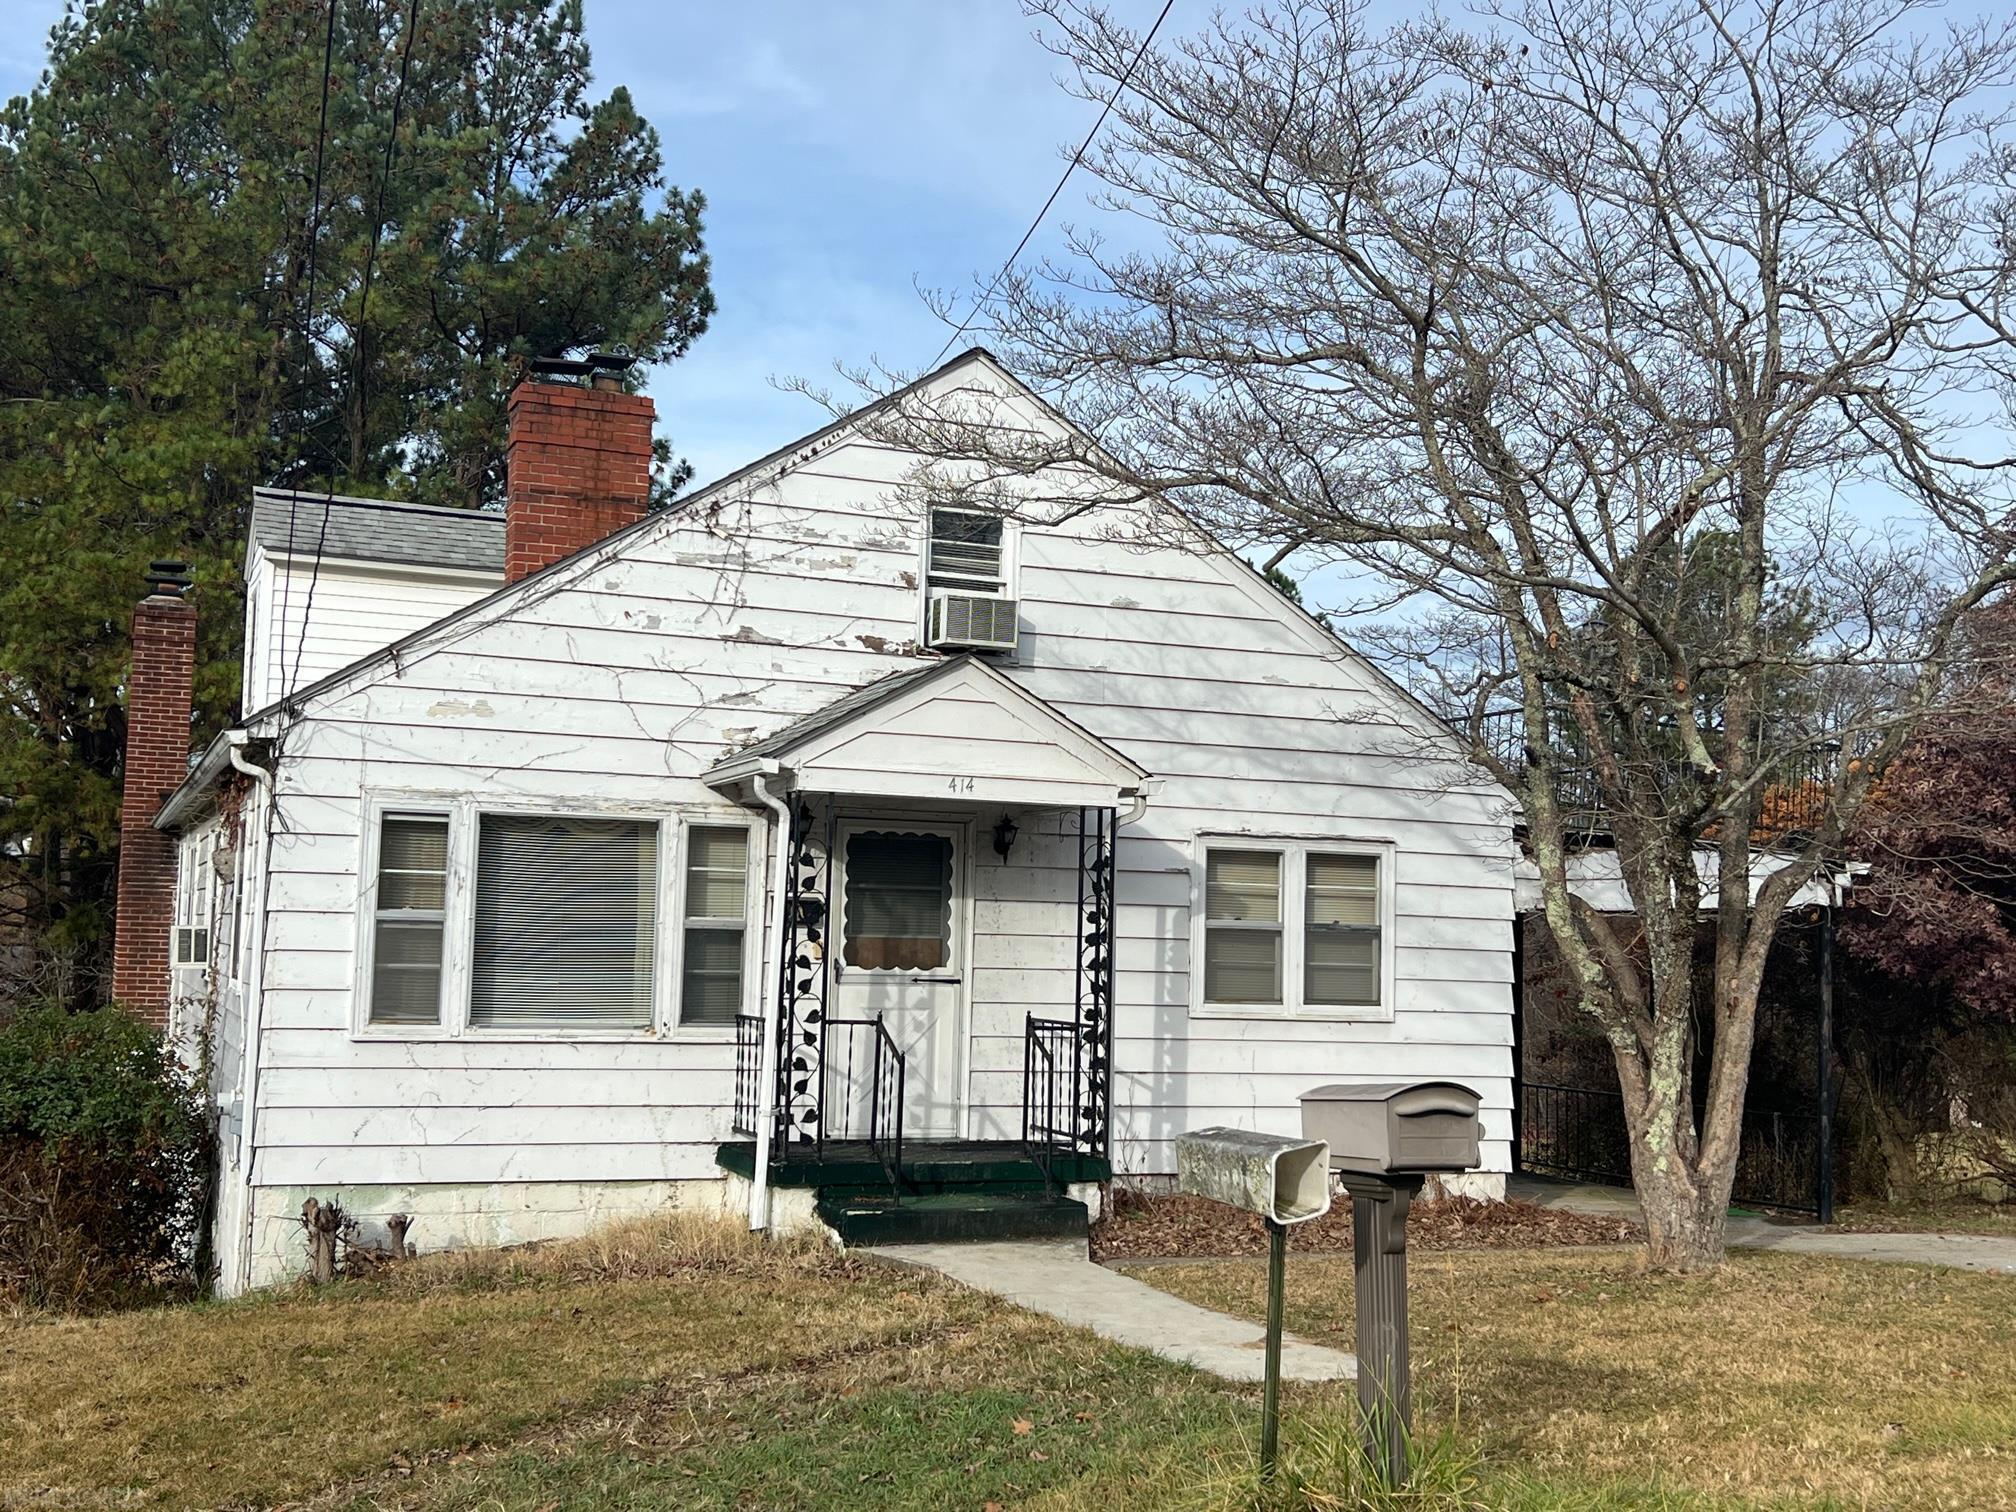 2,363 Sq. Ft., 4 BR/2.5 BA -- Good solid bones and amenities with this home - just needs some TLC. Lots of living space and storage. Great workshop (24X12), vinyl sided, electricity. Recent survey. Roof 6 Years old. New sump pump. All 3 fireplaces have been woodburning, one with insert. Living area in this home is deceiving from looking at the front!! Great investment as a rental or for your own residence!!! Property being sold "AS IS" - Seller will make no repairs.